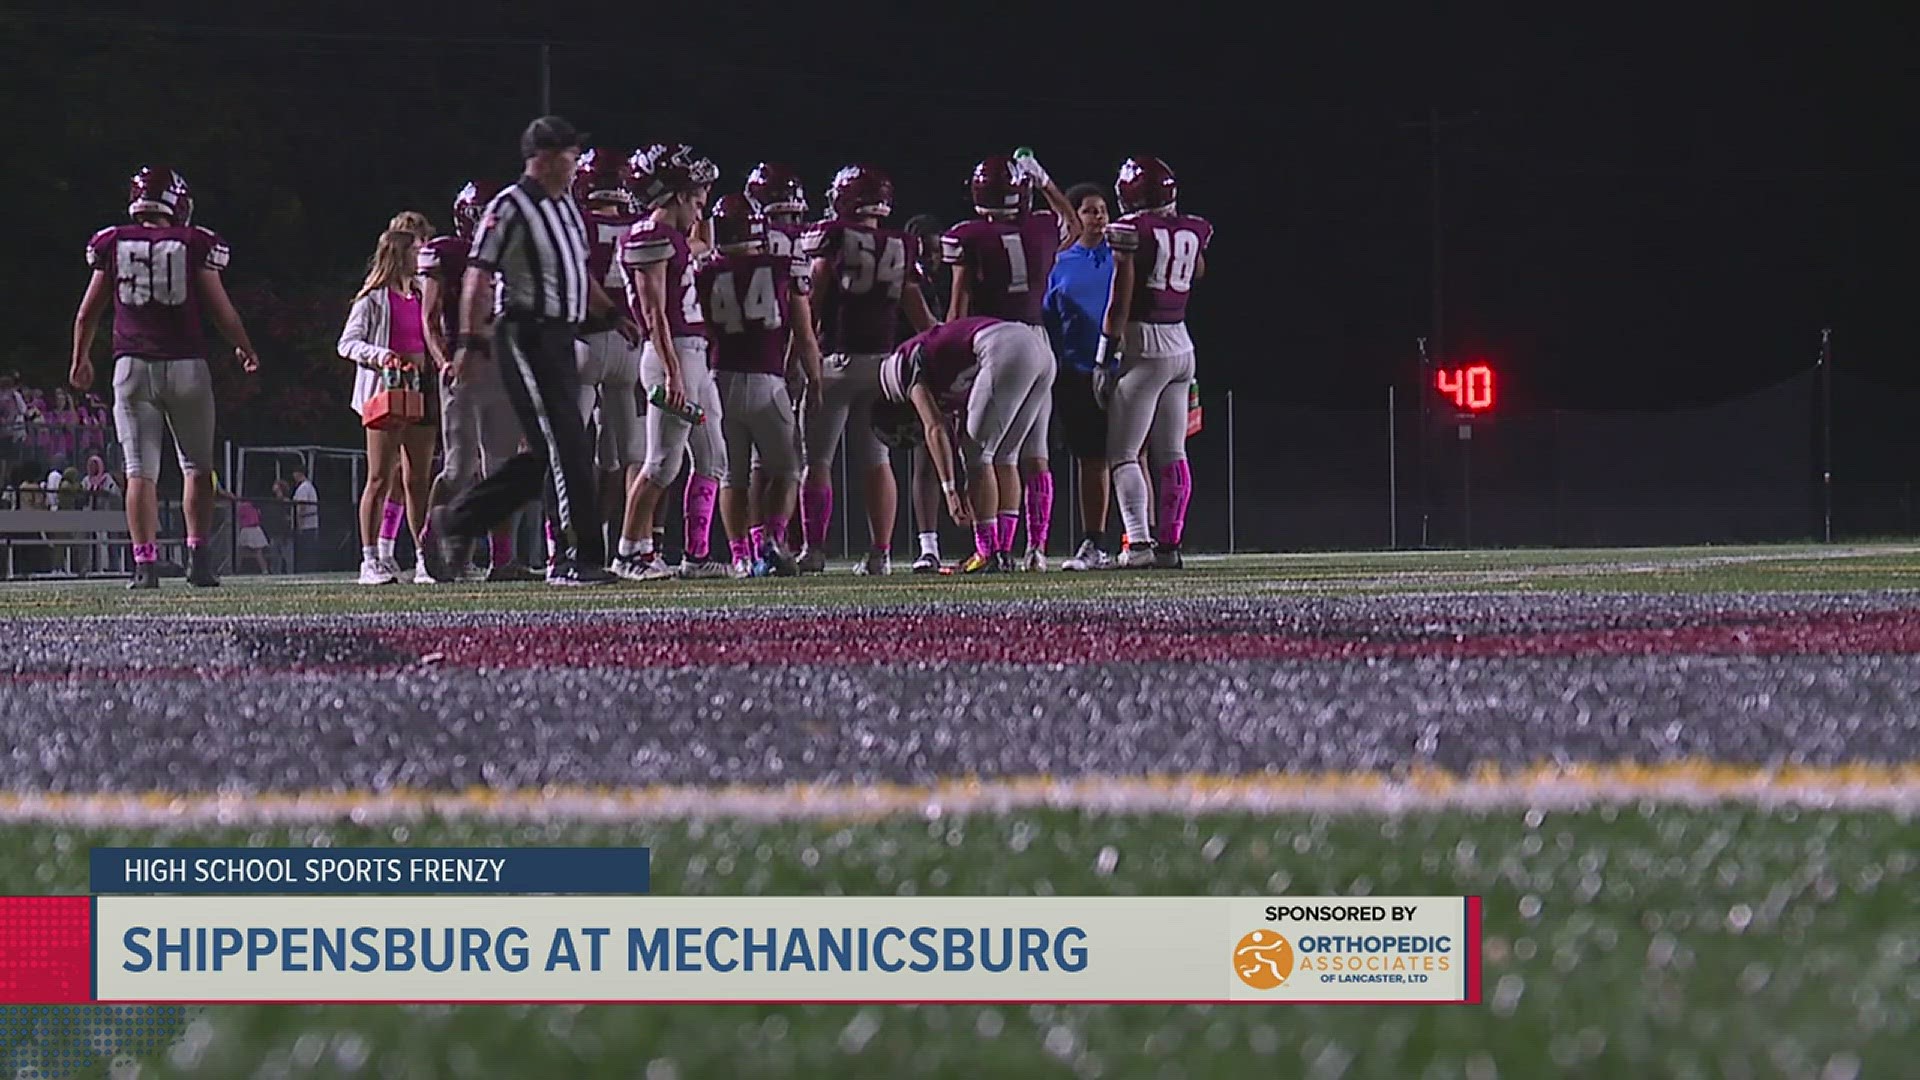 Shippensburg bests Mechanicsburg in a defensive Mid-Penn match-up